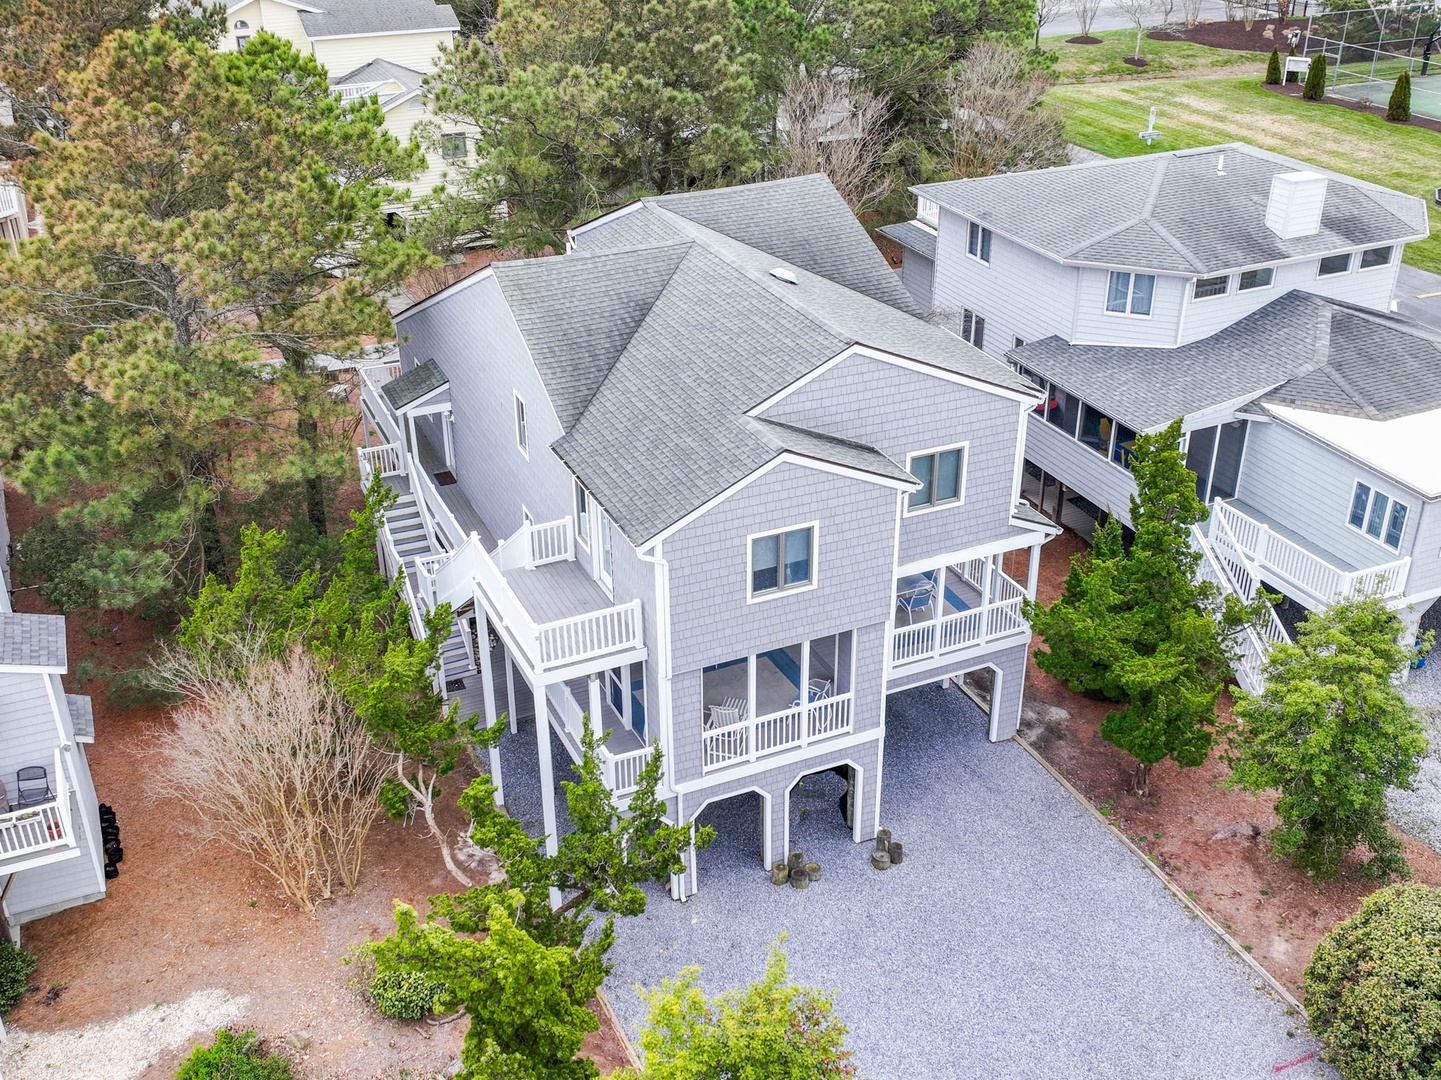 This glorious Delaware beach home offers ample parking and space for the whole family